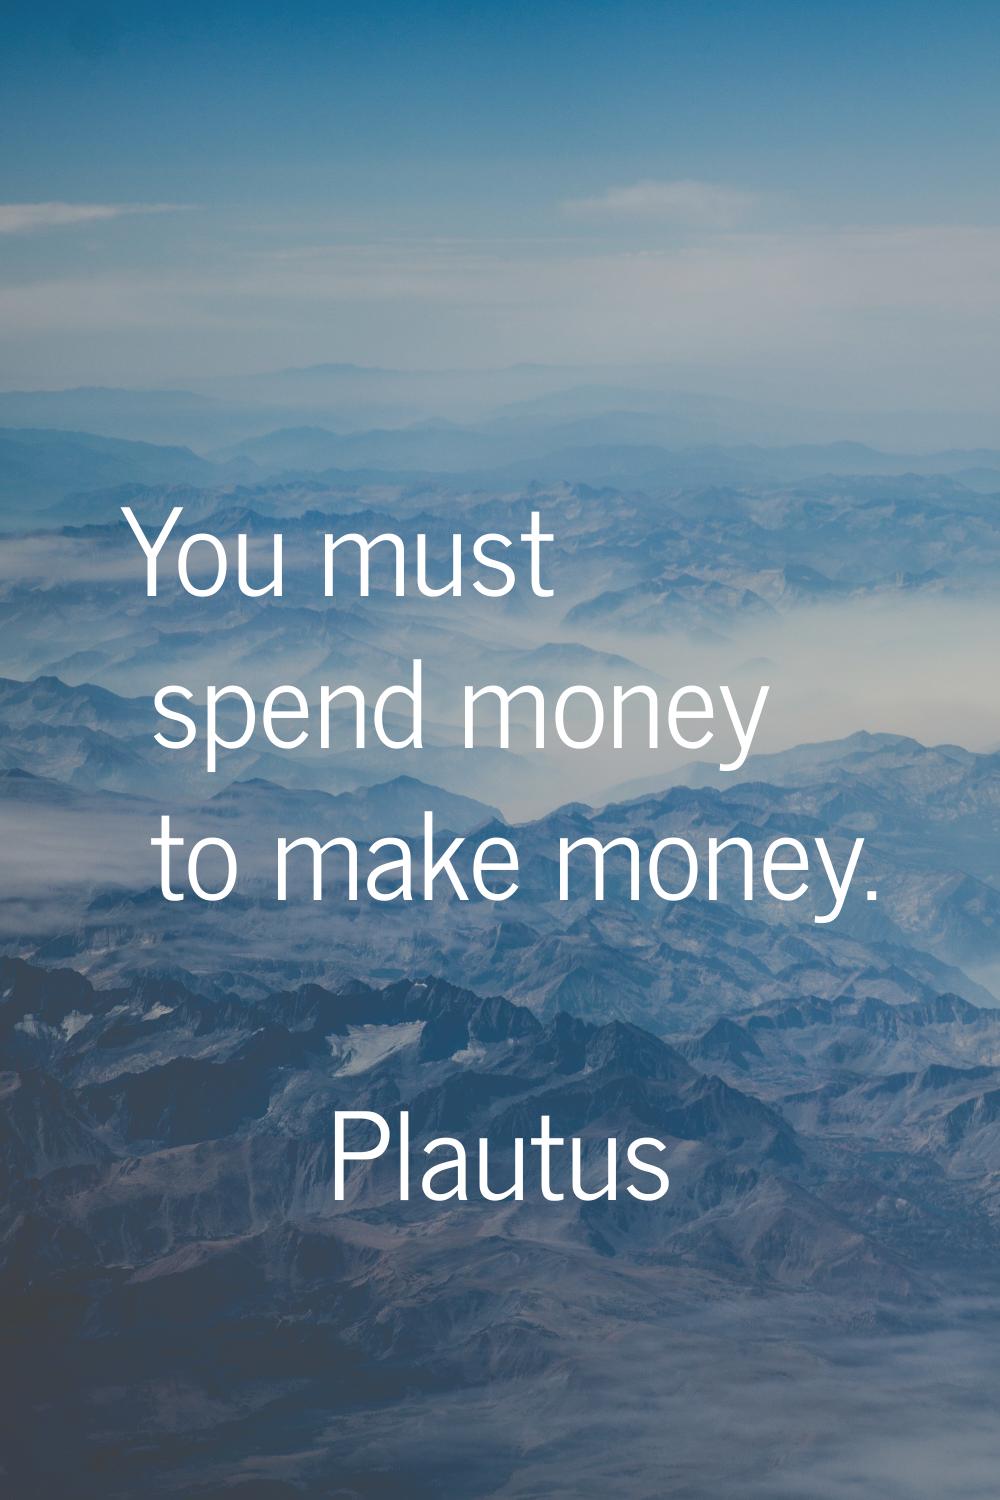 You must spend money to make money.